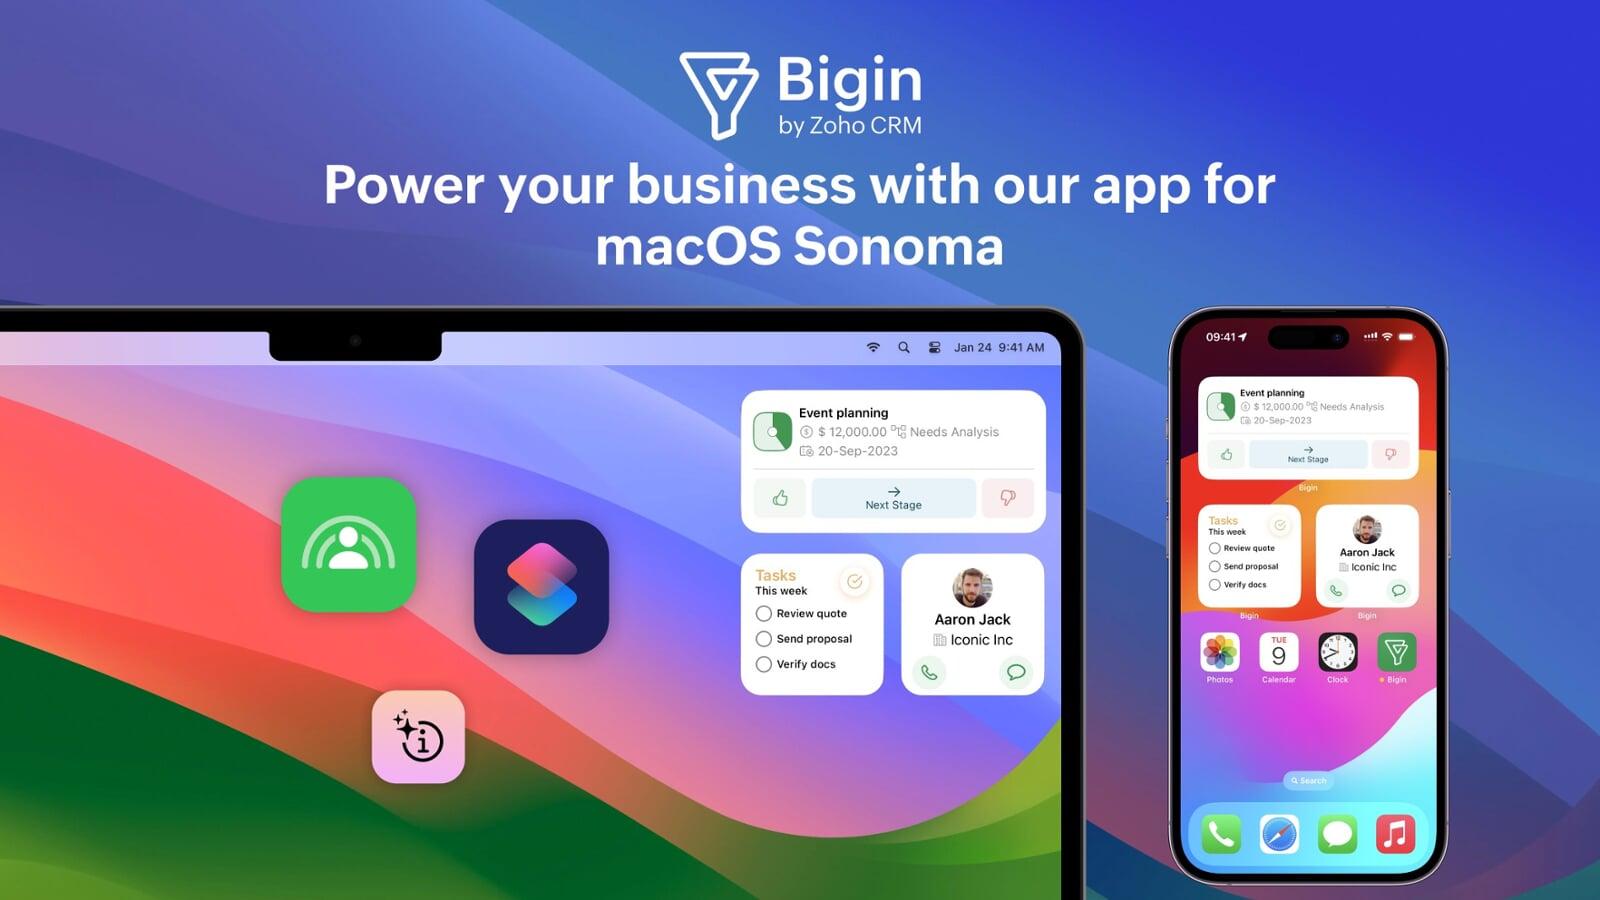 Power your business with the Bigin app for macOS Sonoma